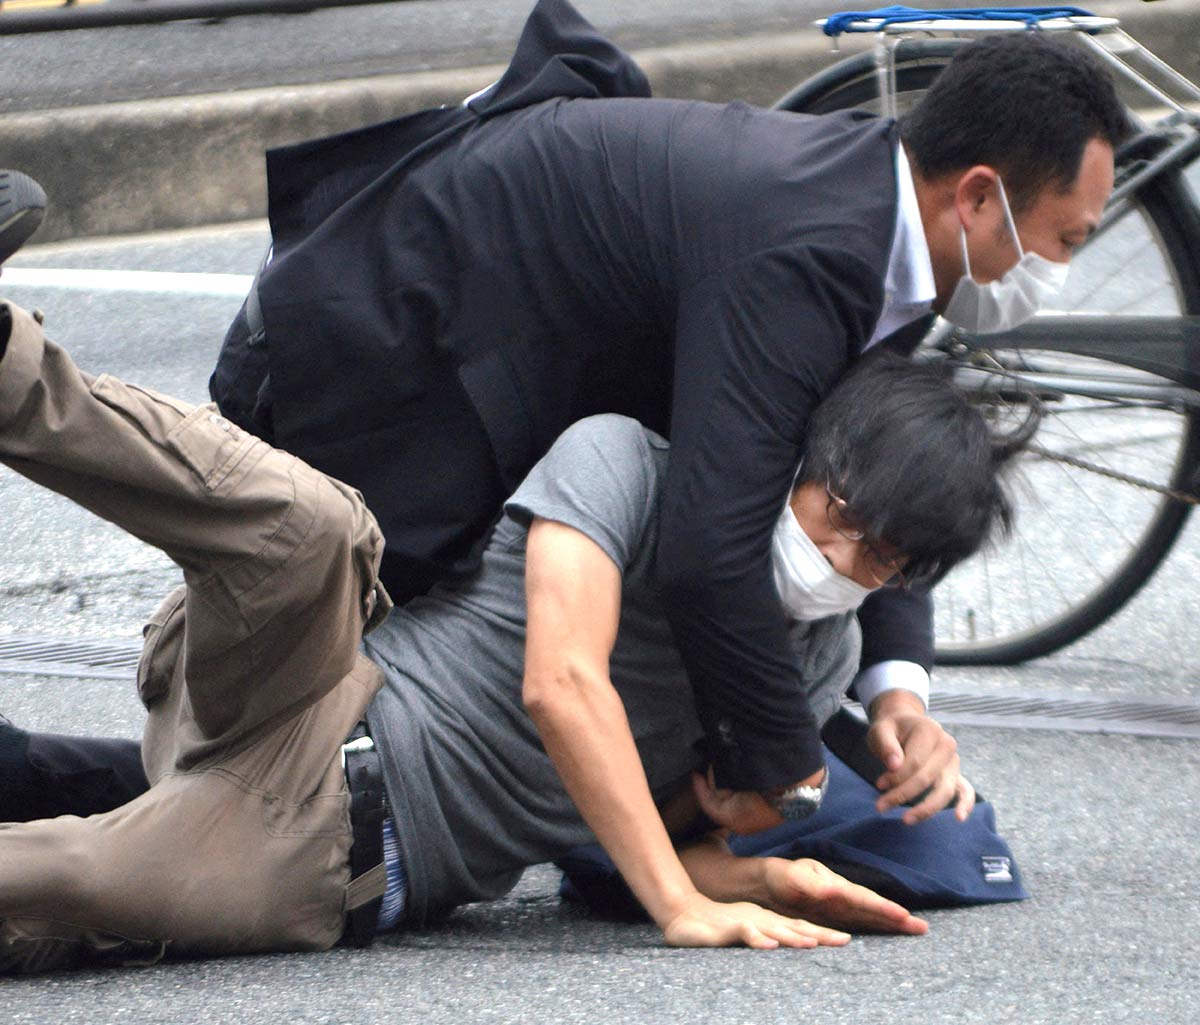 Abe's attacker identified, used a self-made gun